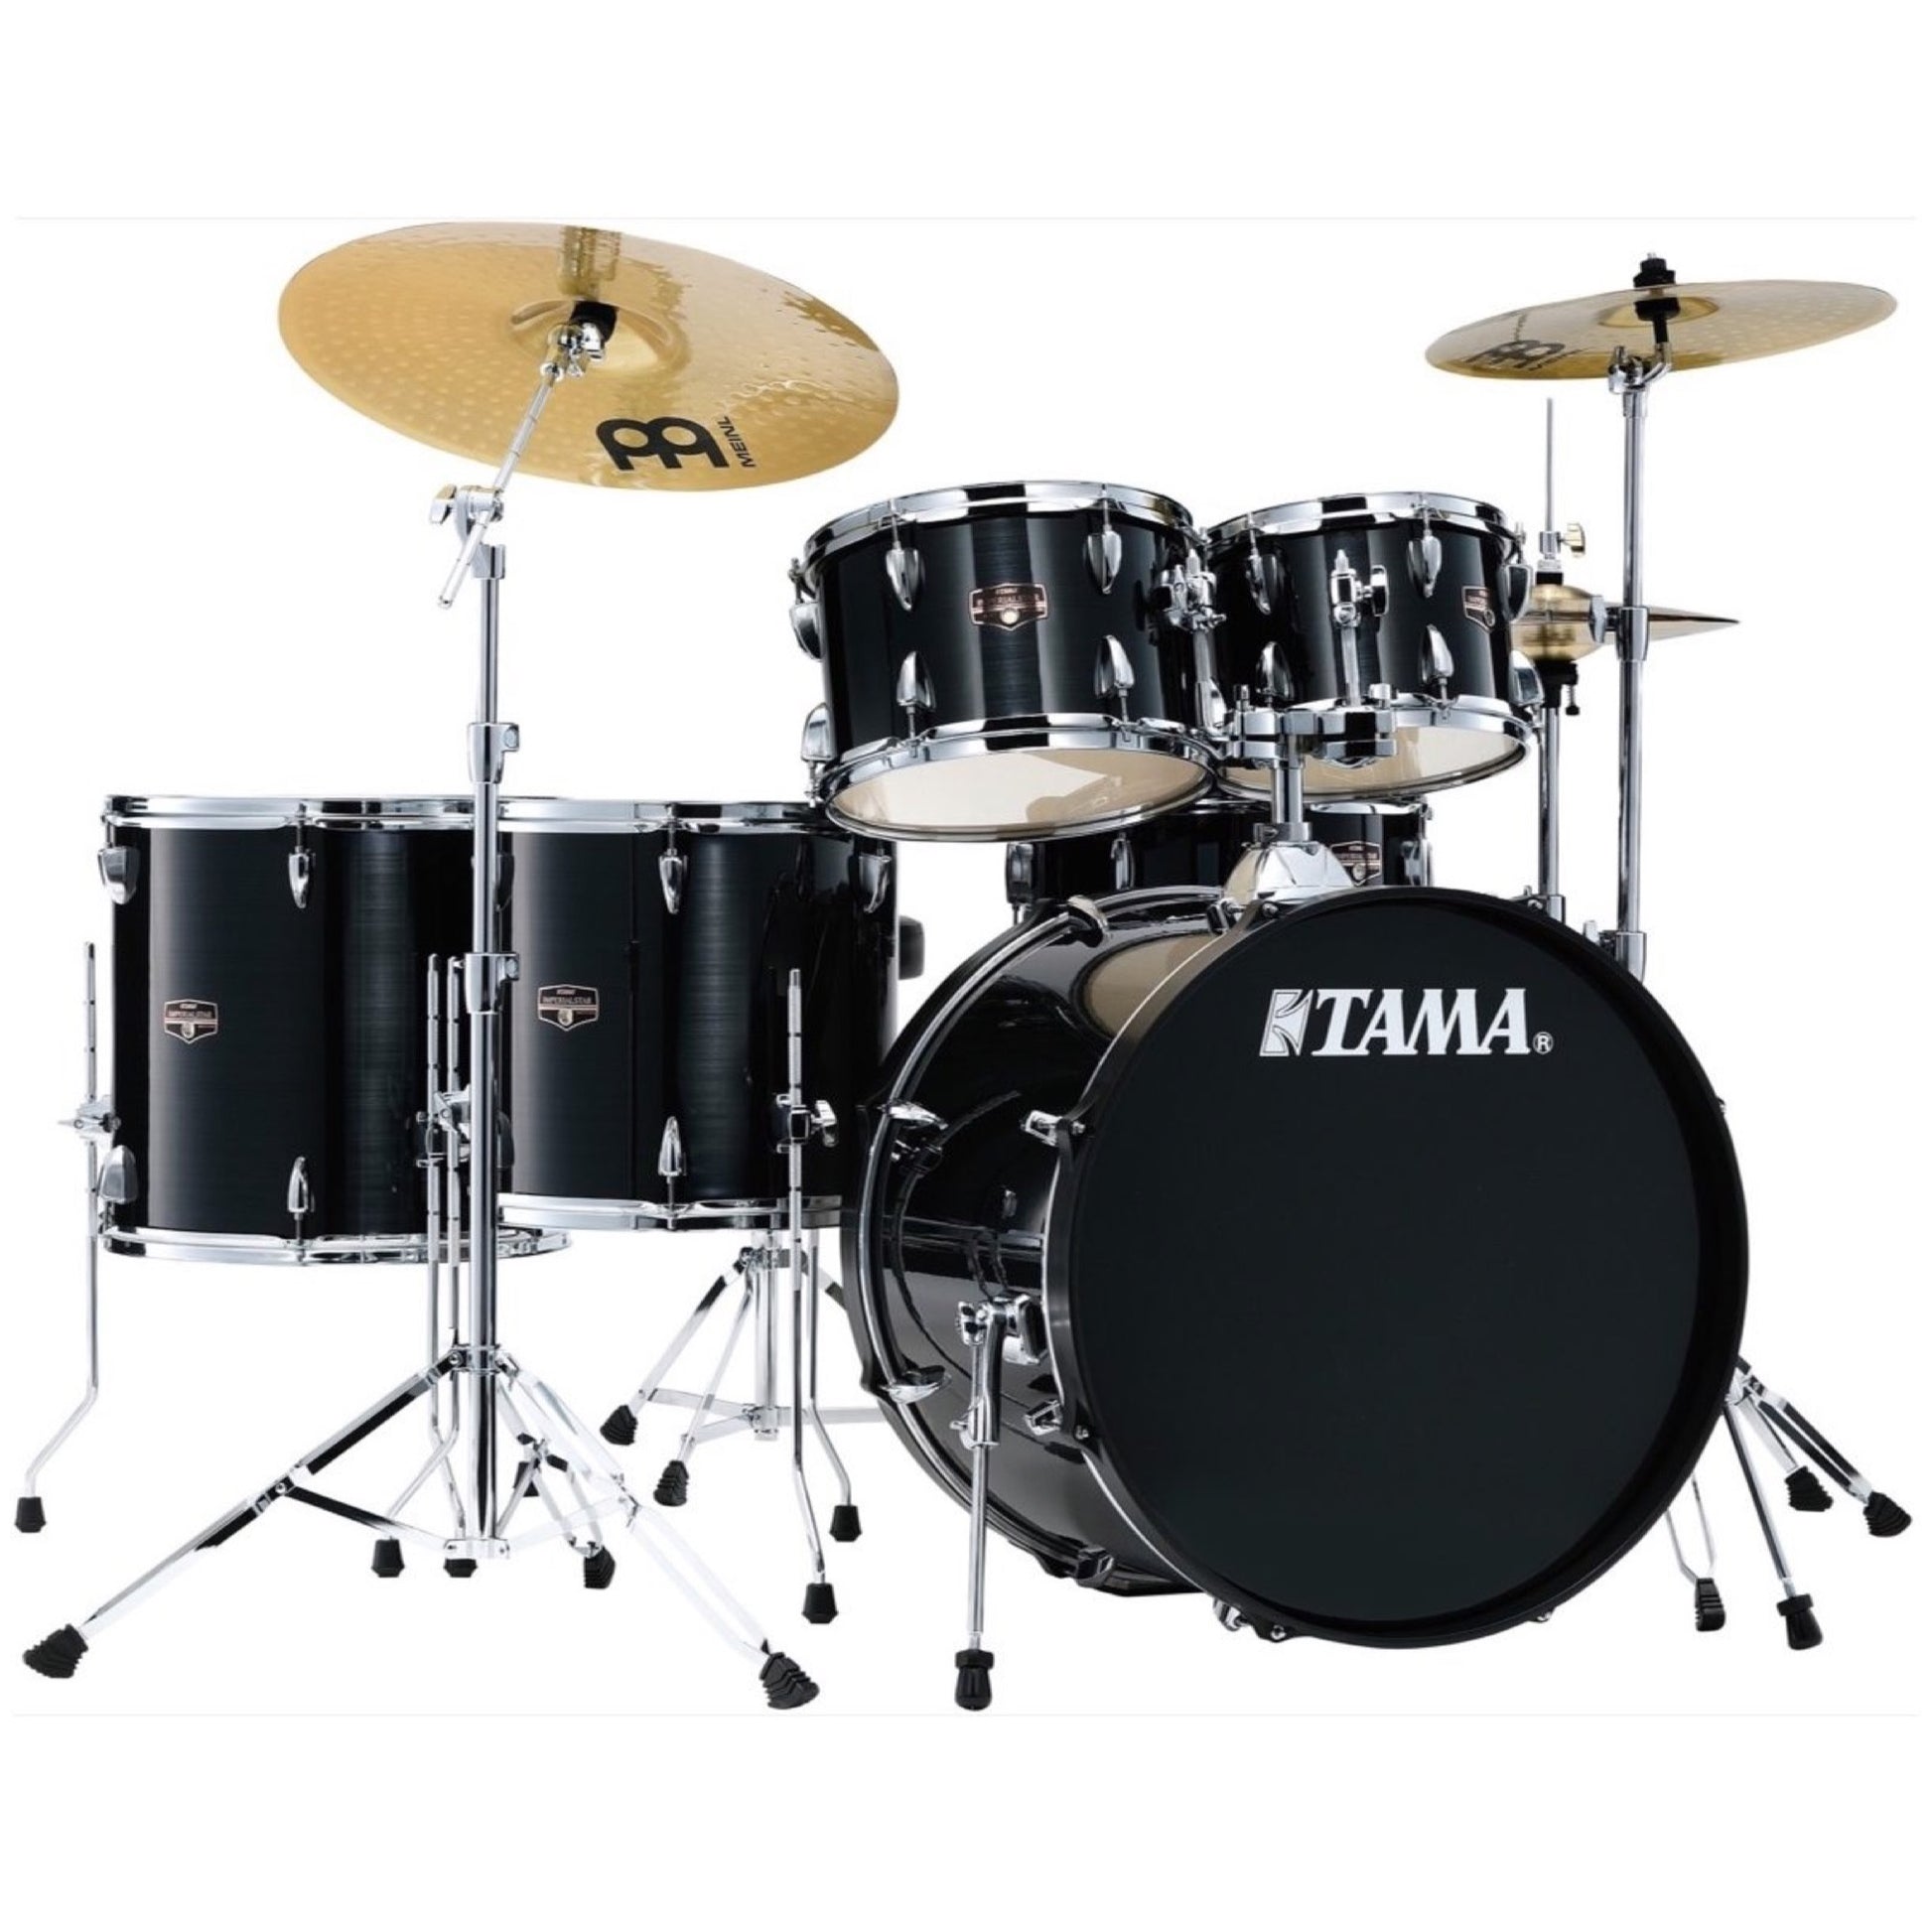 Tama IE62C Imperialstar Drum Kit, 6-Piece (with Meinl Cymbals), Hairline Black